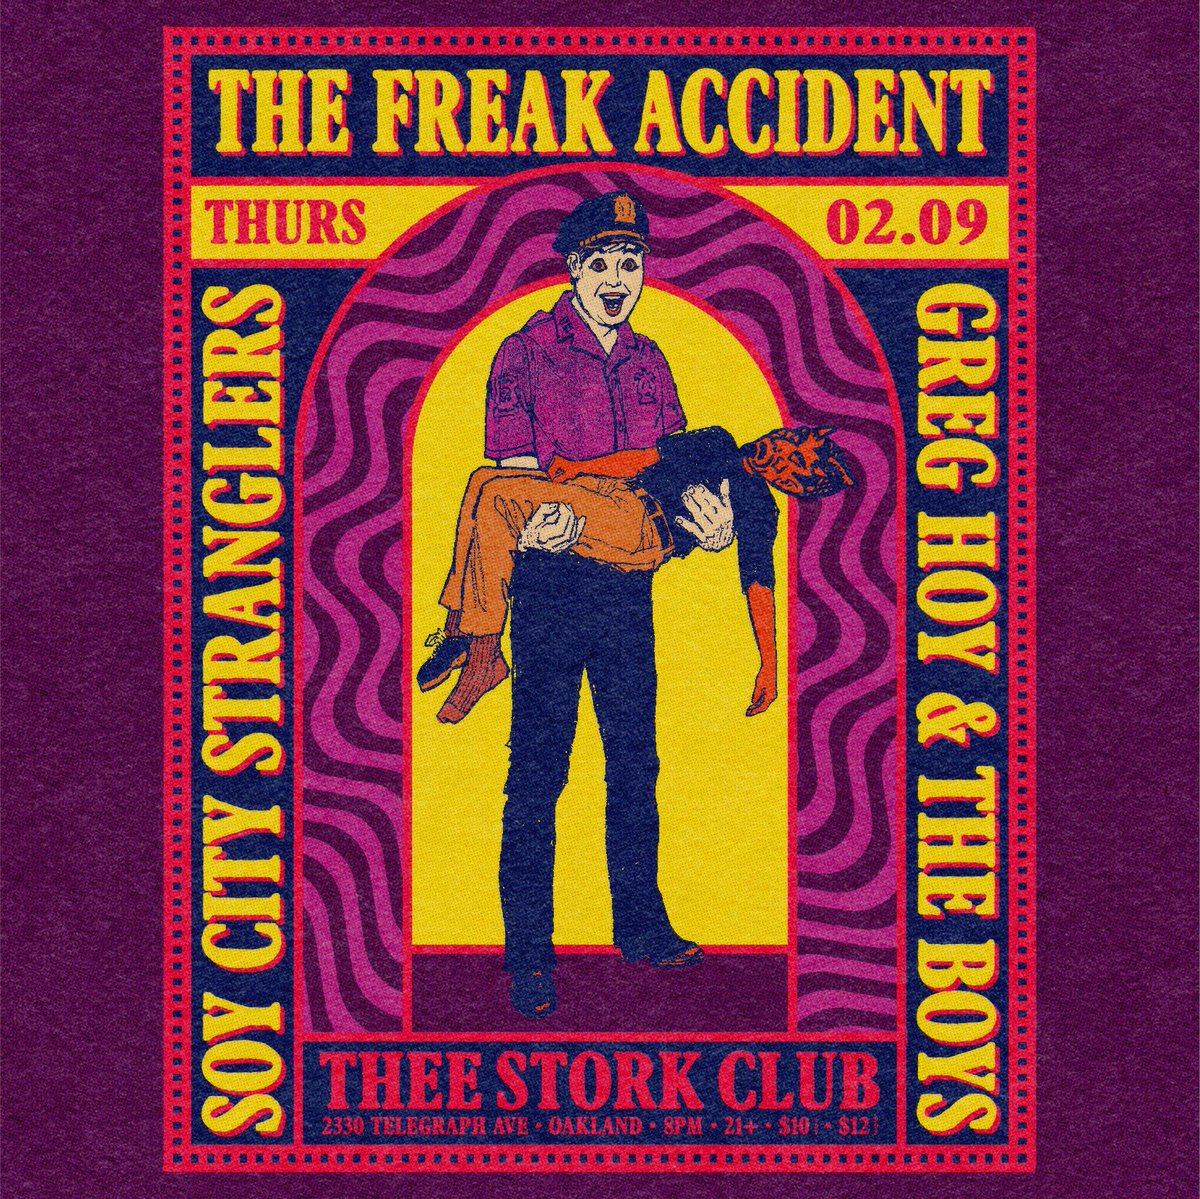 Thursday! GH&THEBs return at Thee Stork Club, Oakland with Soy City Stranglers and The Freak Accident! seetickets.us/socialtwitter/…